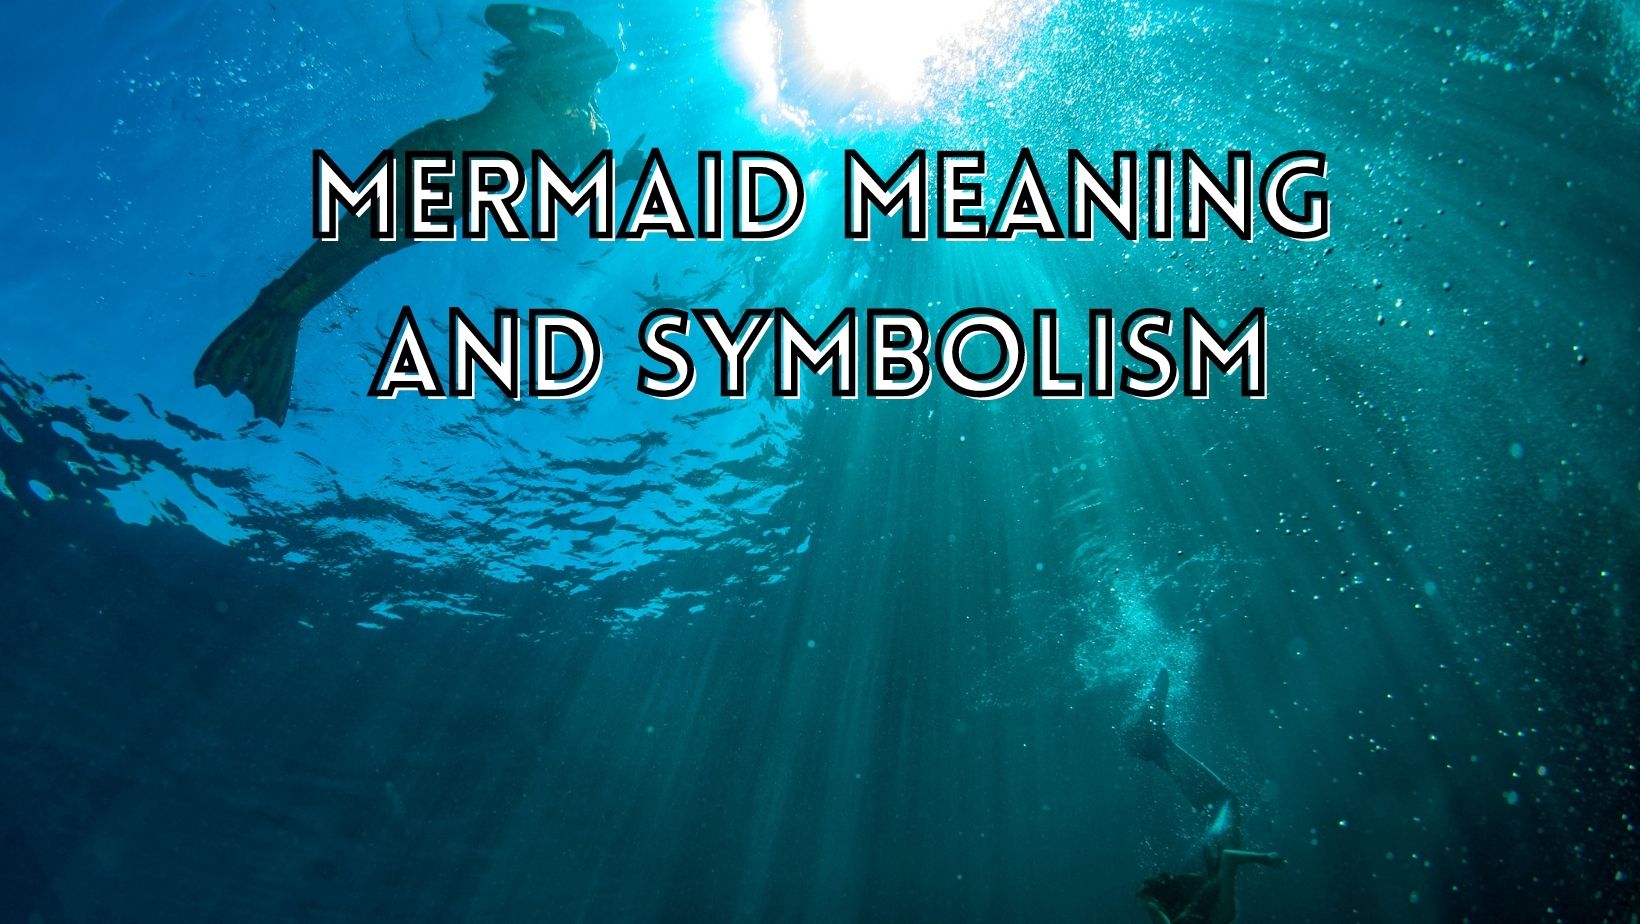 Mermaid meaning and symbolism